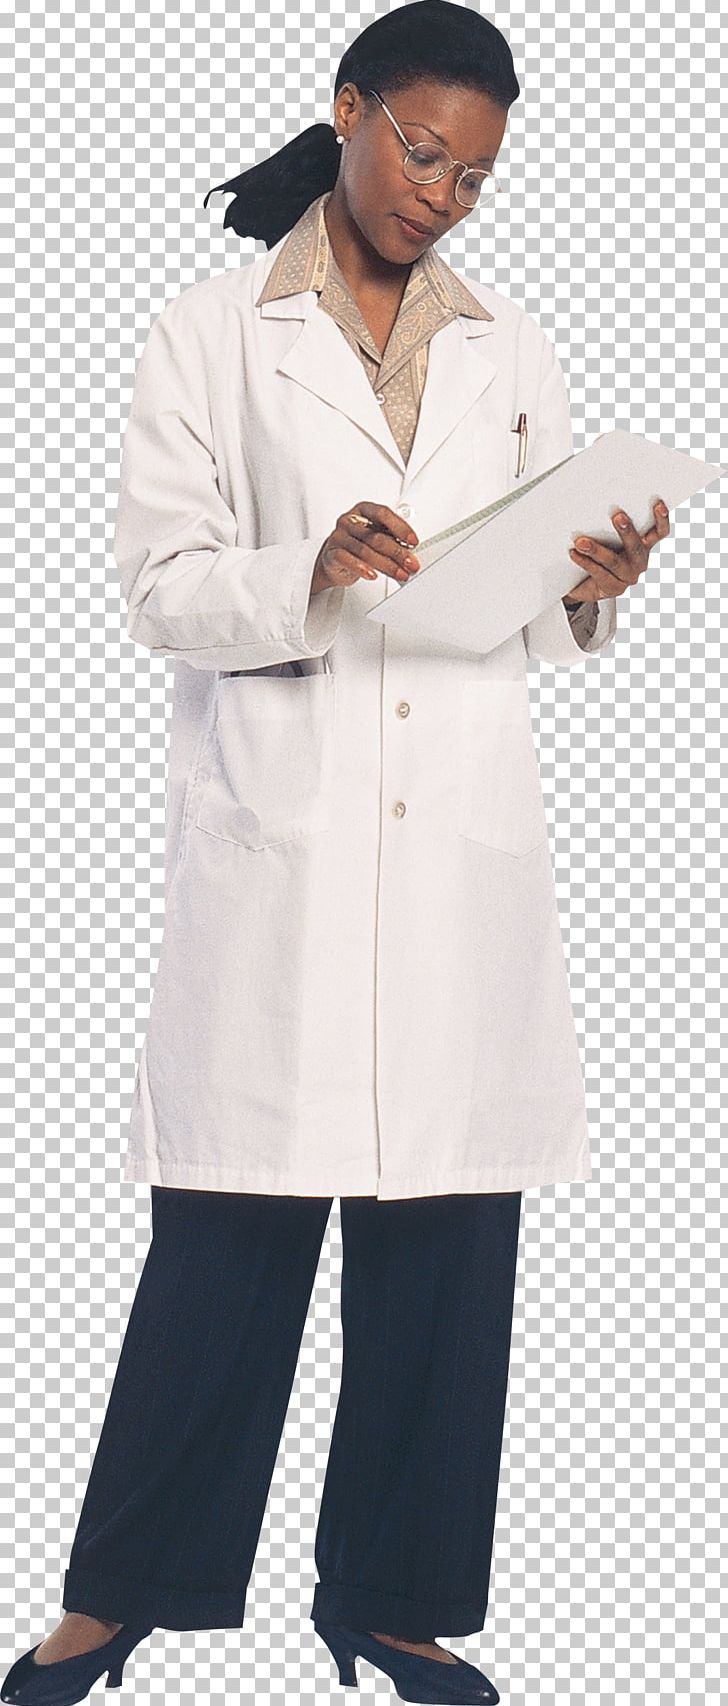 Obstetrics And Gynaecology Gender Medicine Physician PNG, Clipart, Chefs Uniform, Coat, Cook, Costume, Doctor Free PNG Download